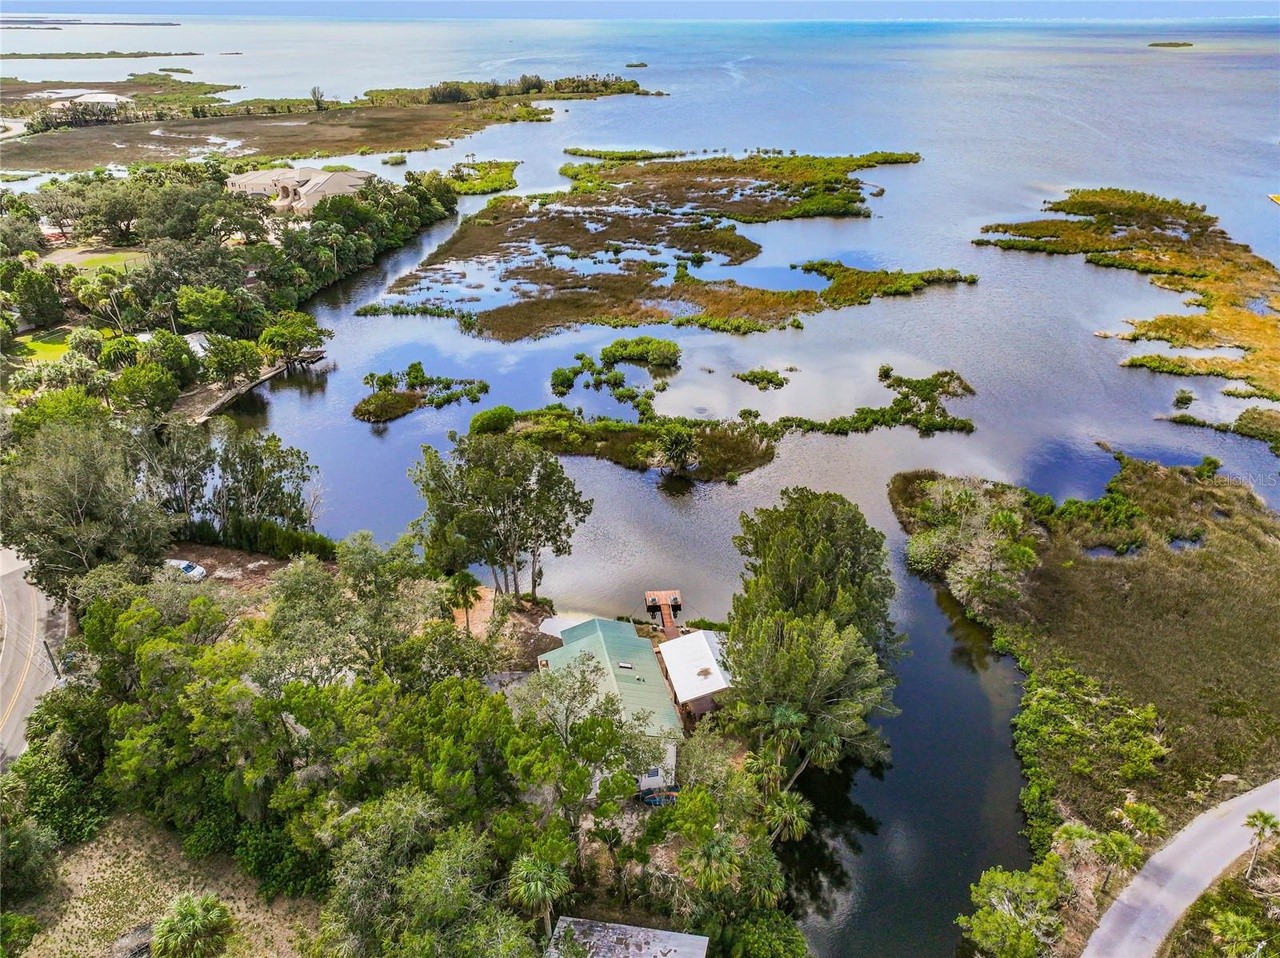 This secluded Tampa Bay home comes with its own beach and two private islands